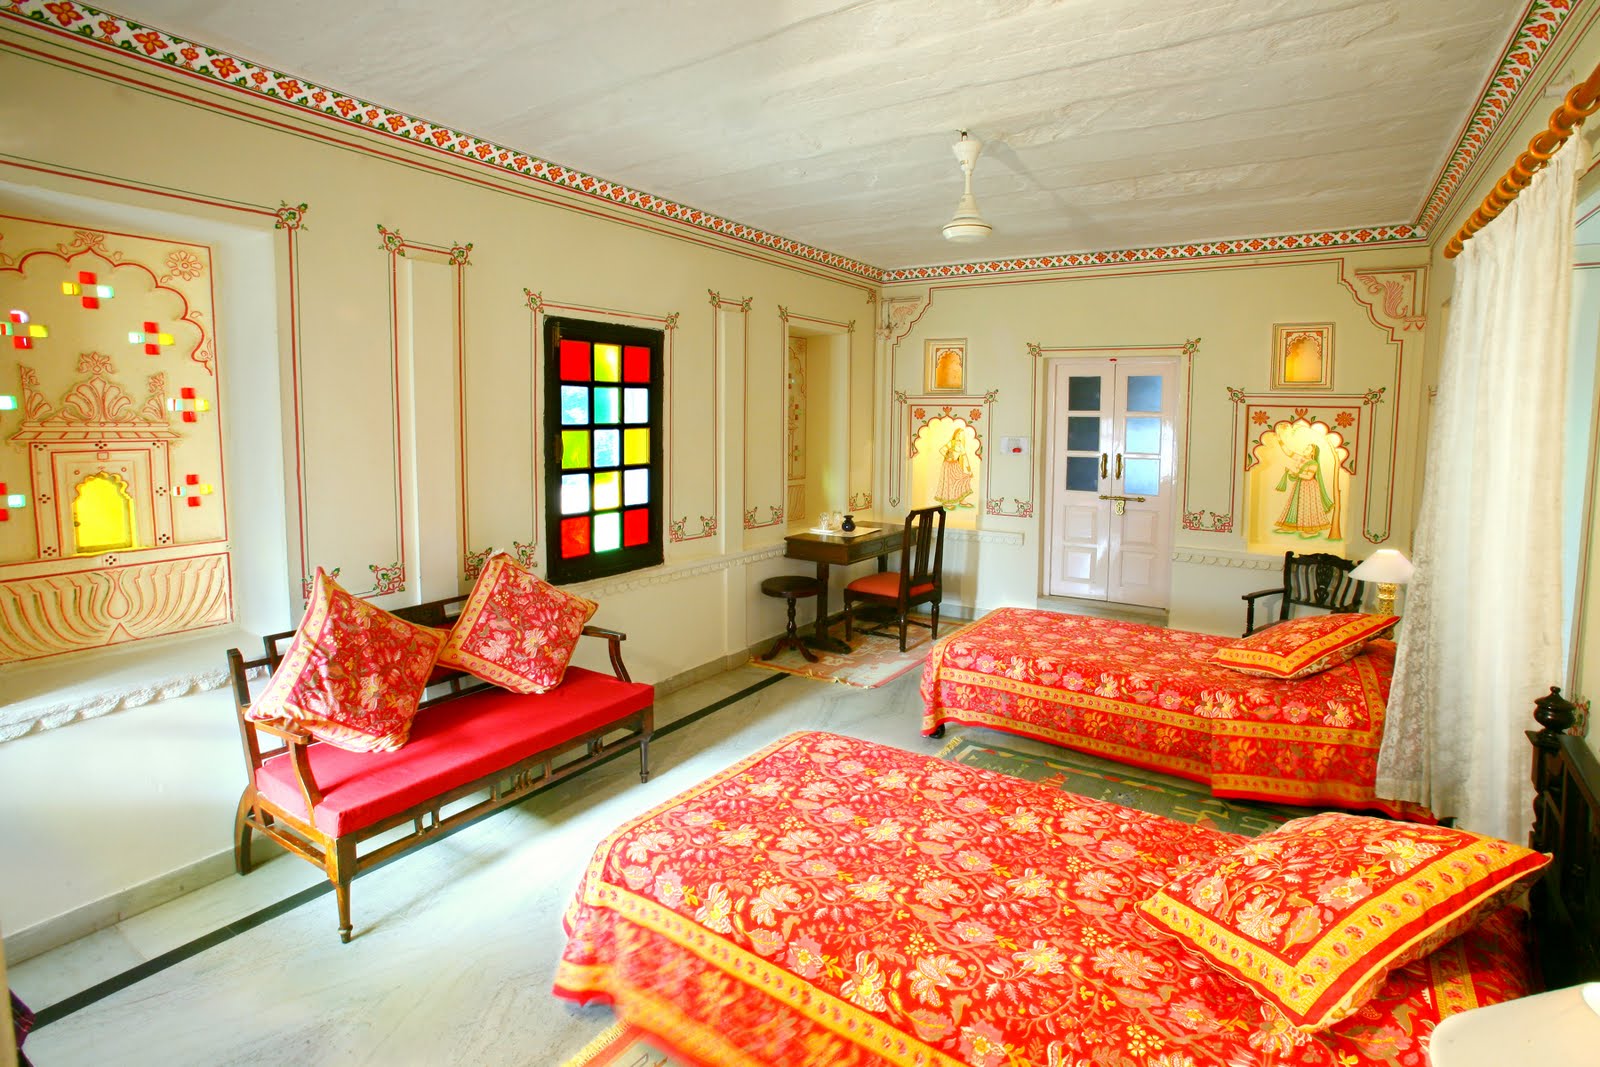 Rajasthani Style Interior Design beds and drapes